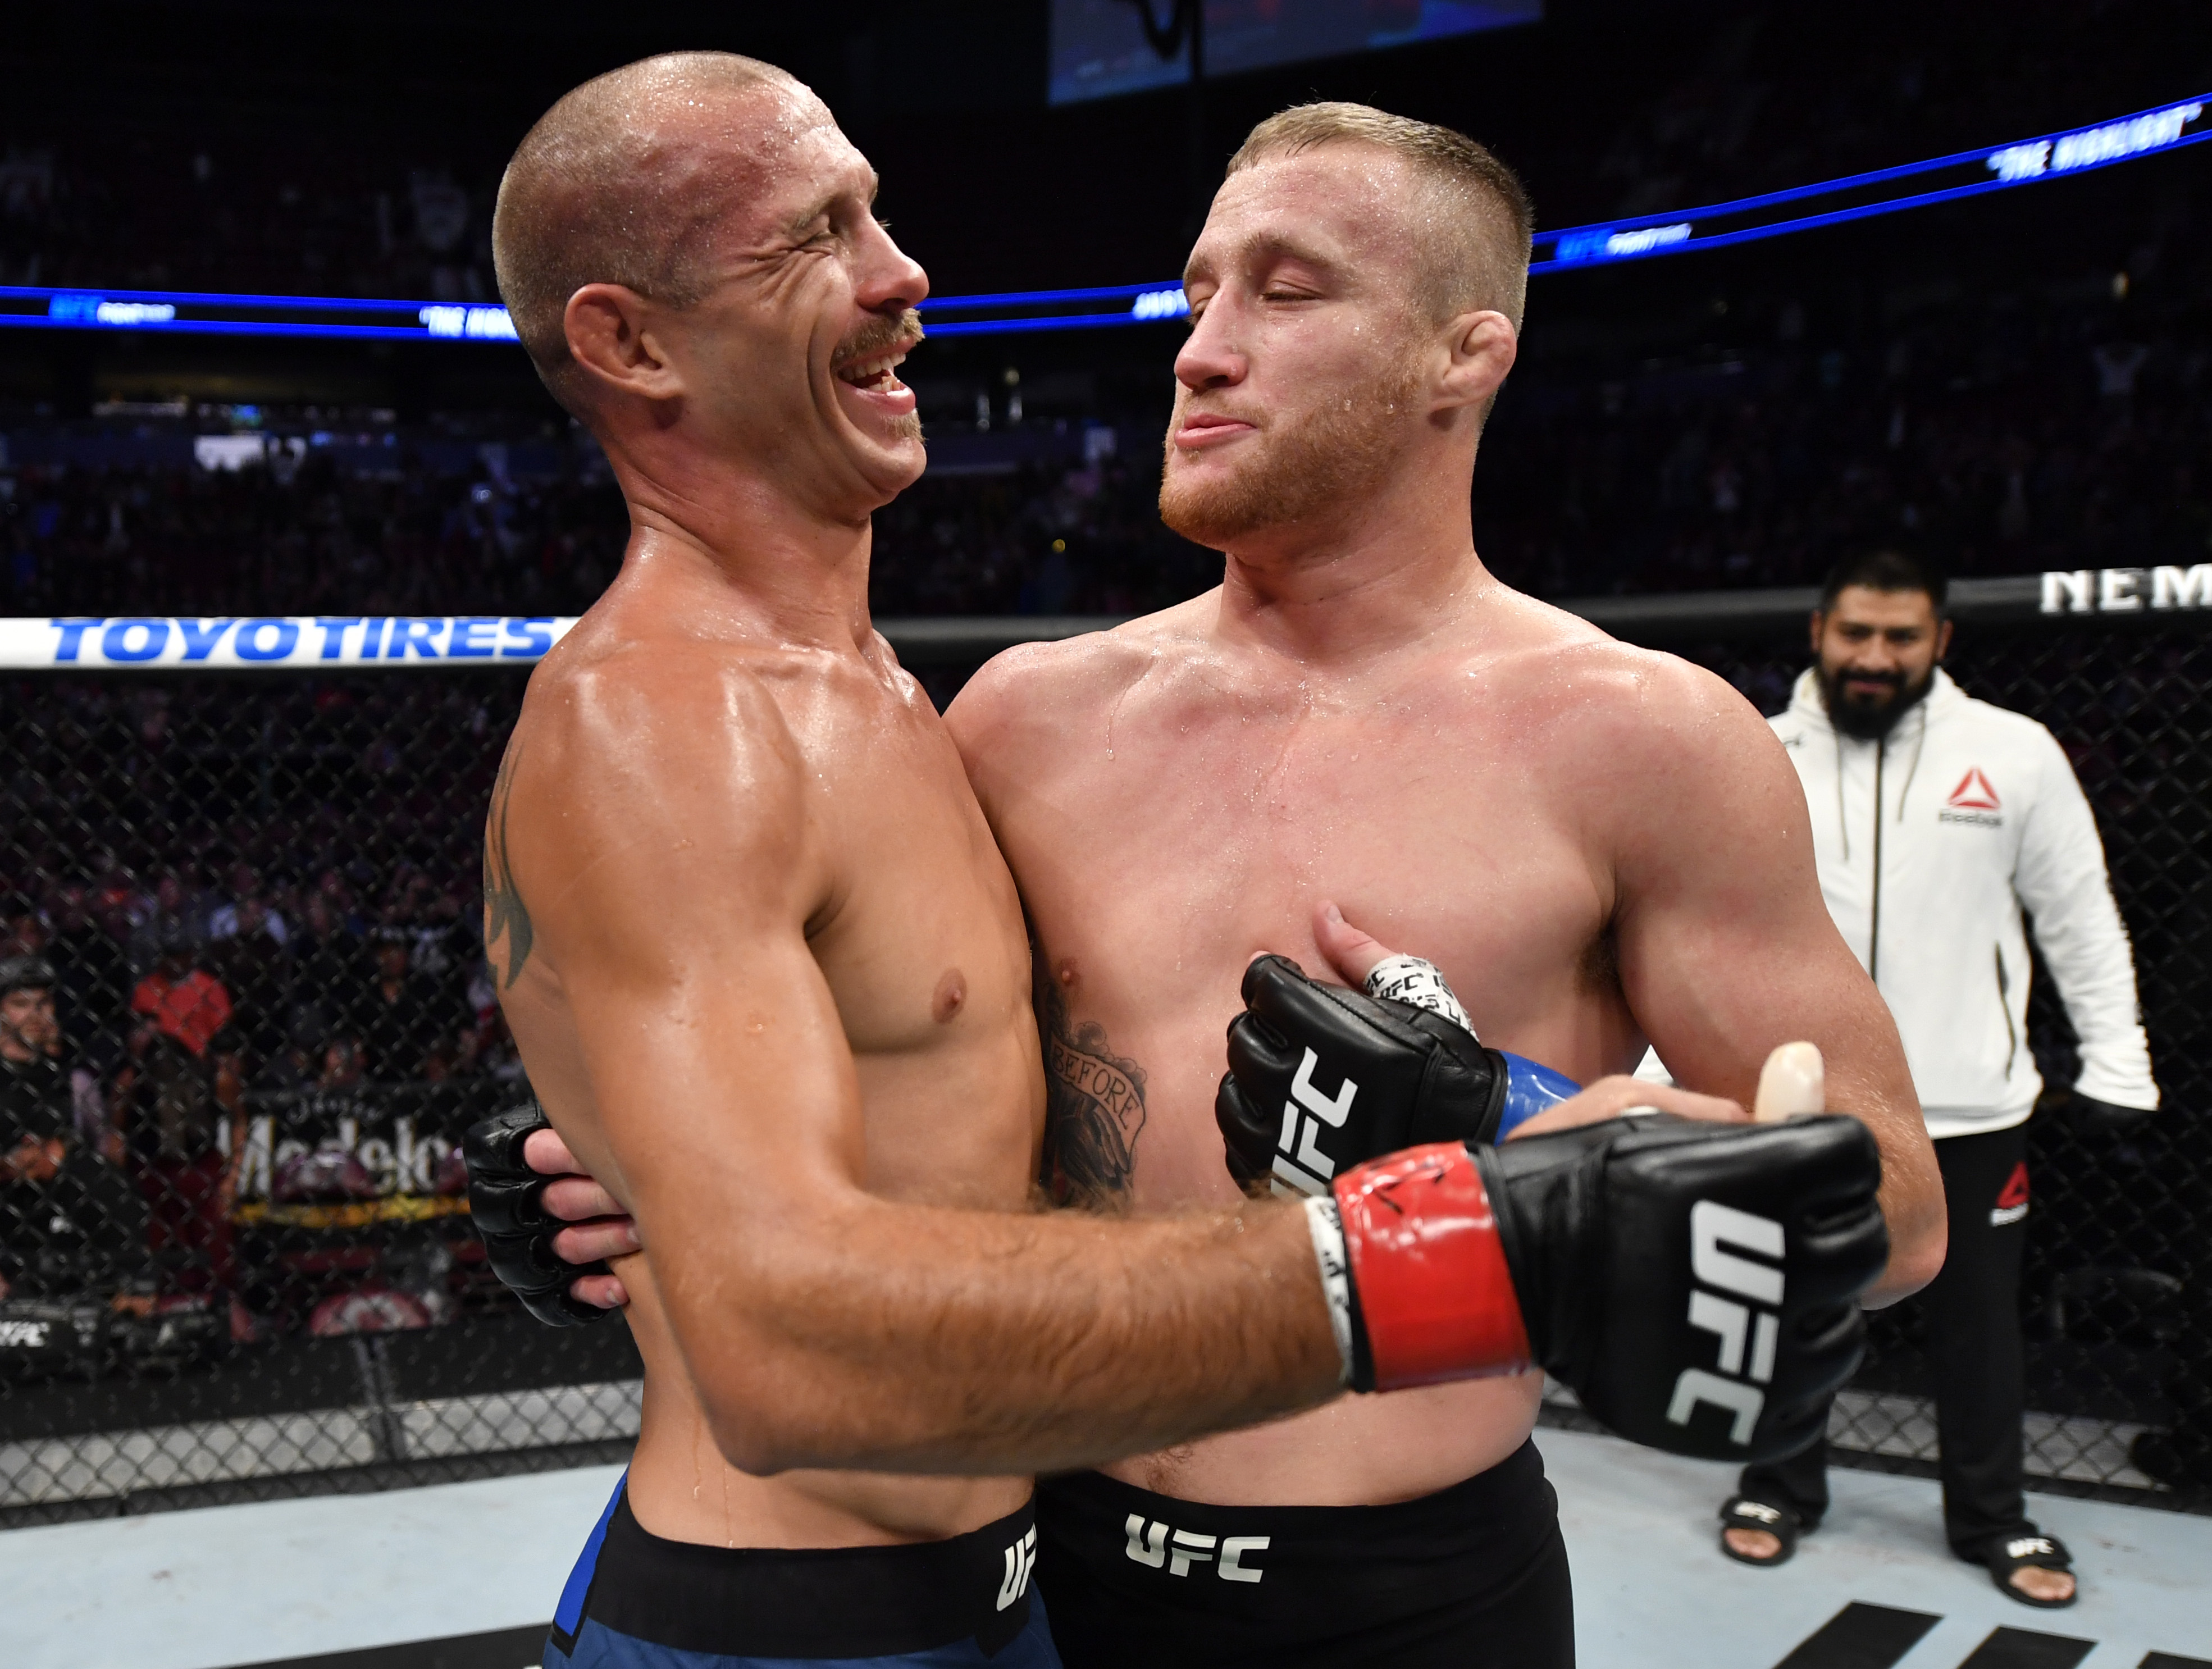 Justin Gaethje and Donald Cerrone hug after their lightweight bout